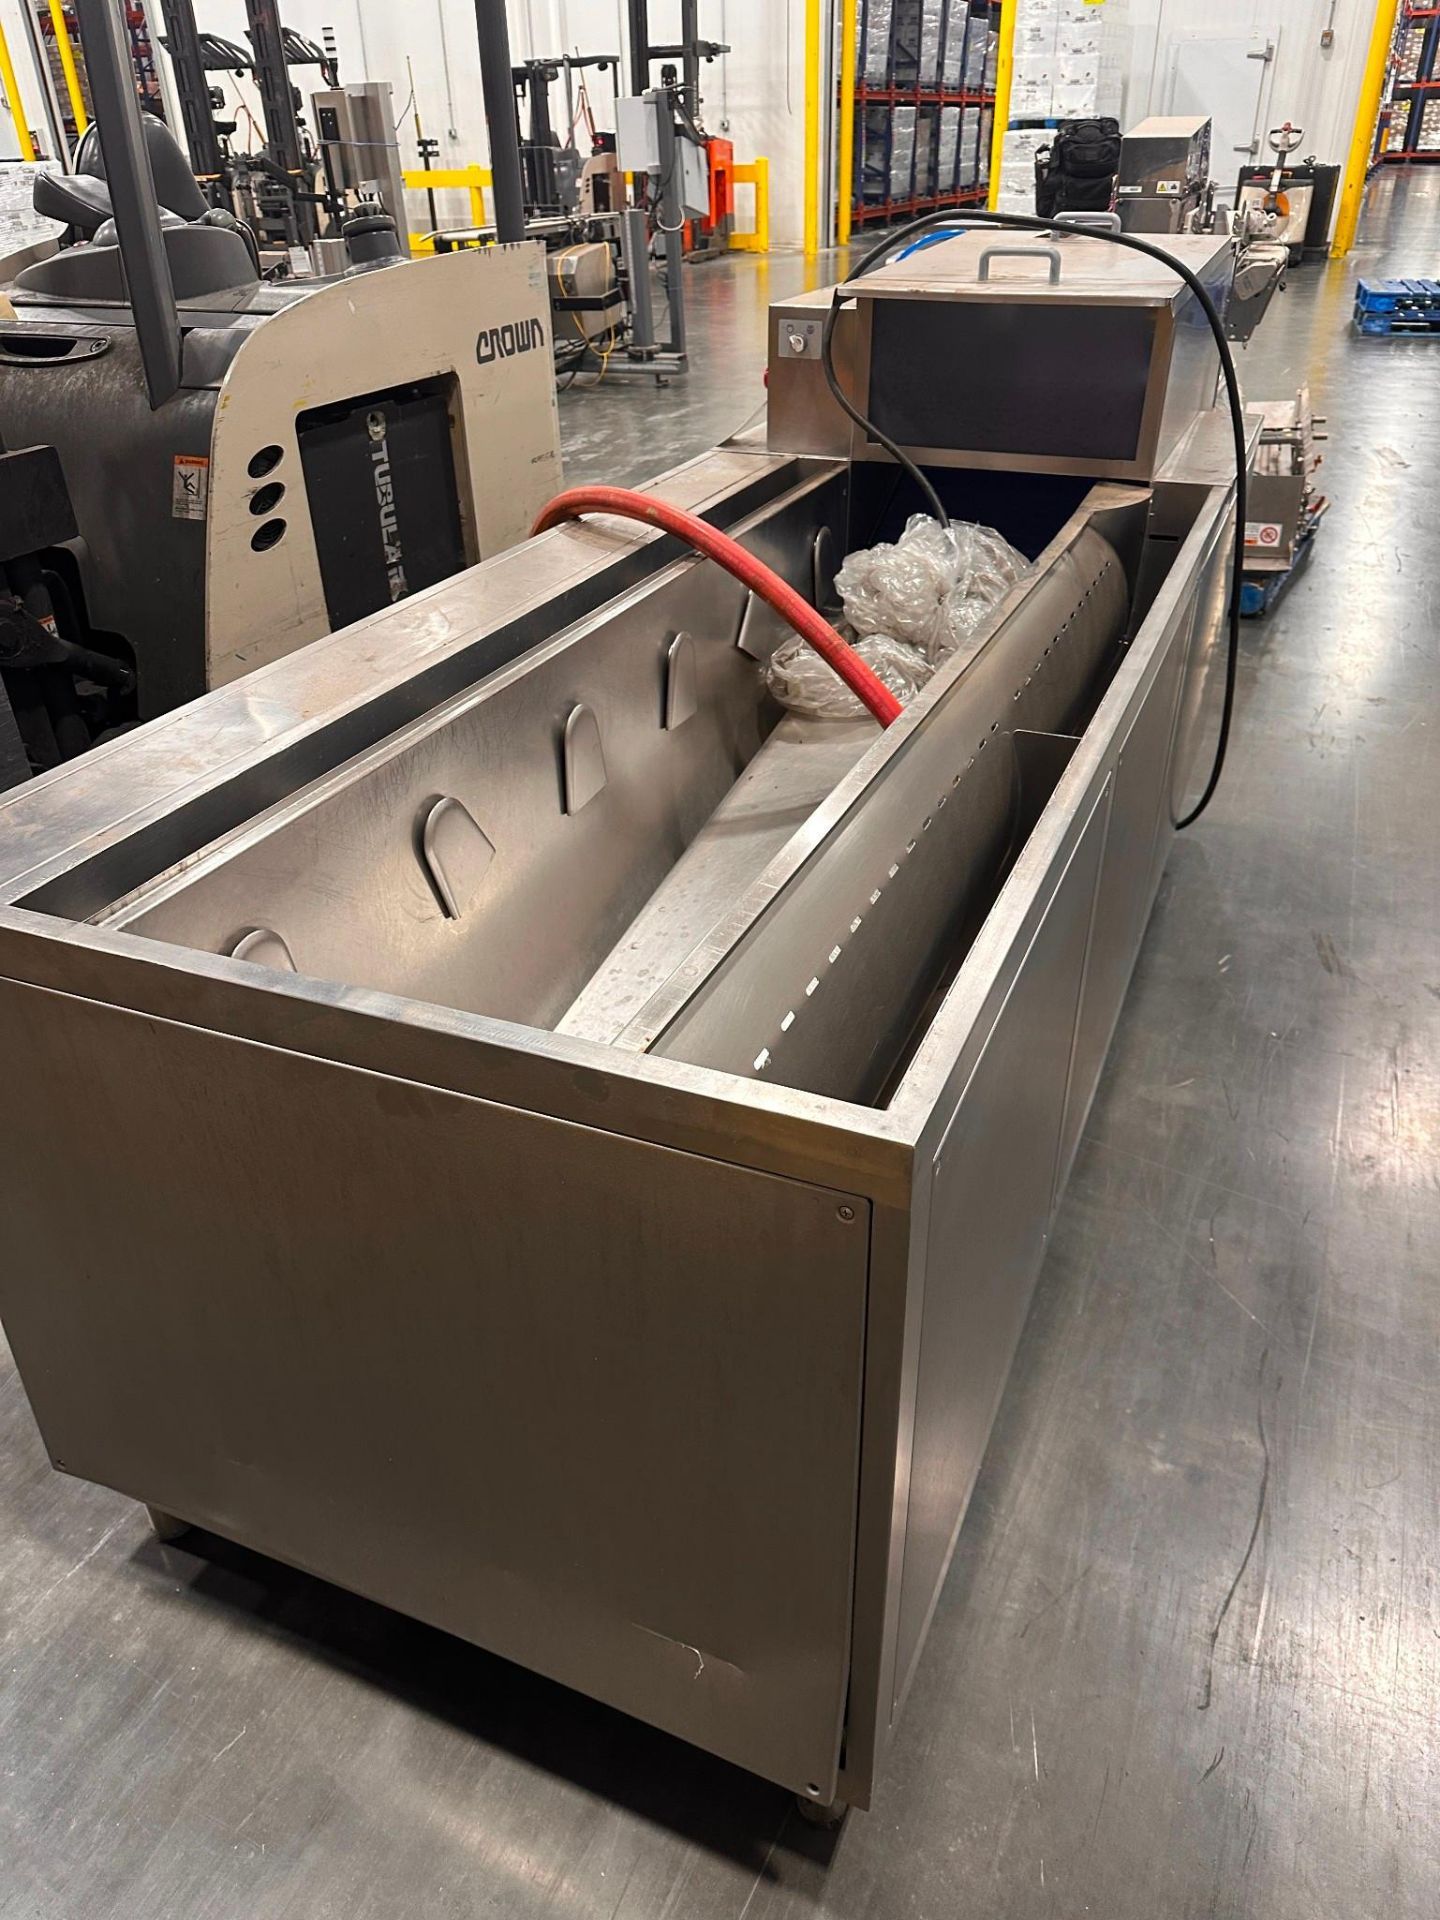 ATIRMATIC 400 AUTOMATIC VEGETABLE WASHER - Image 6 of 12